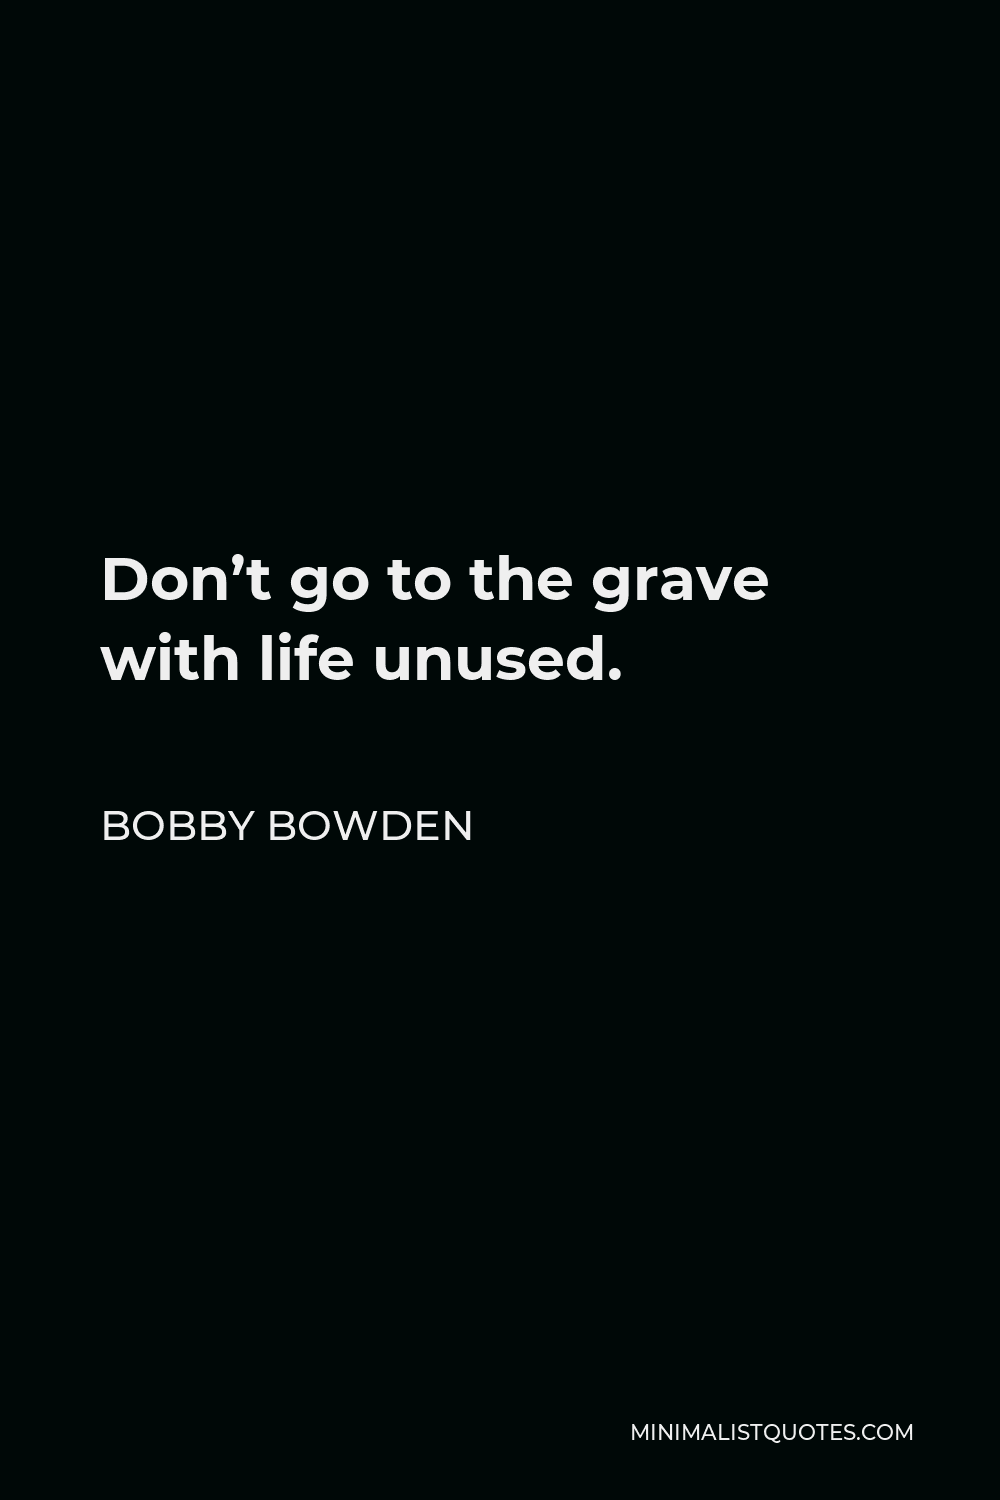 Bobby Bowden Quote - Don’t go to the grave with life unused.